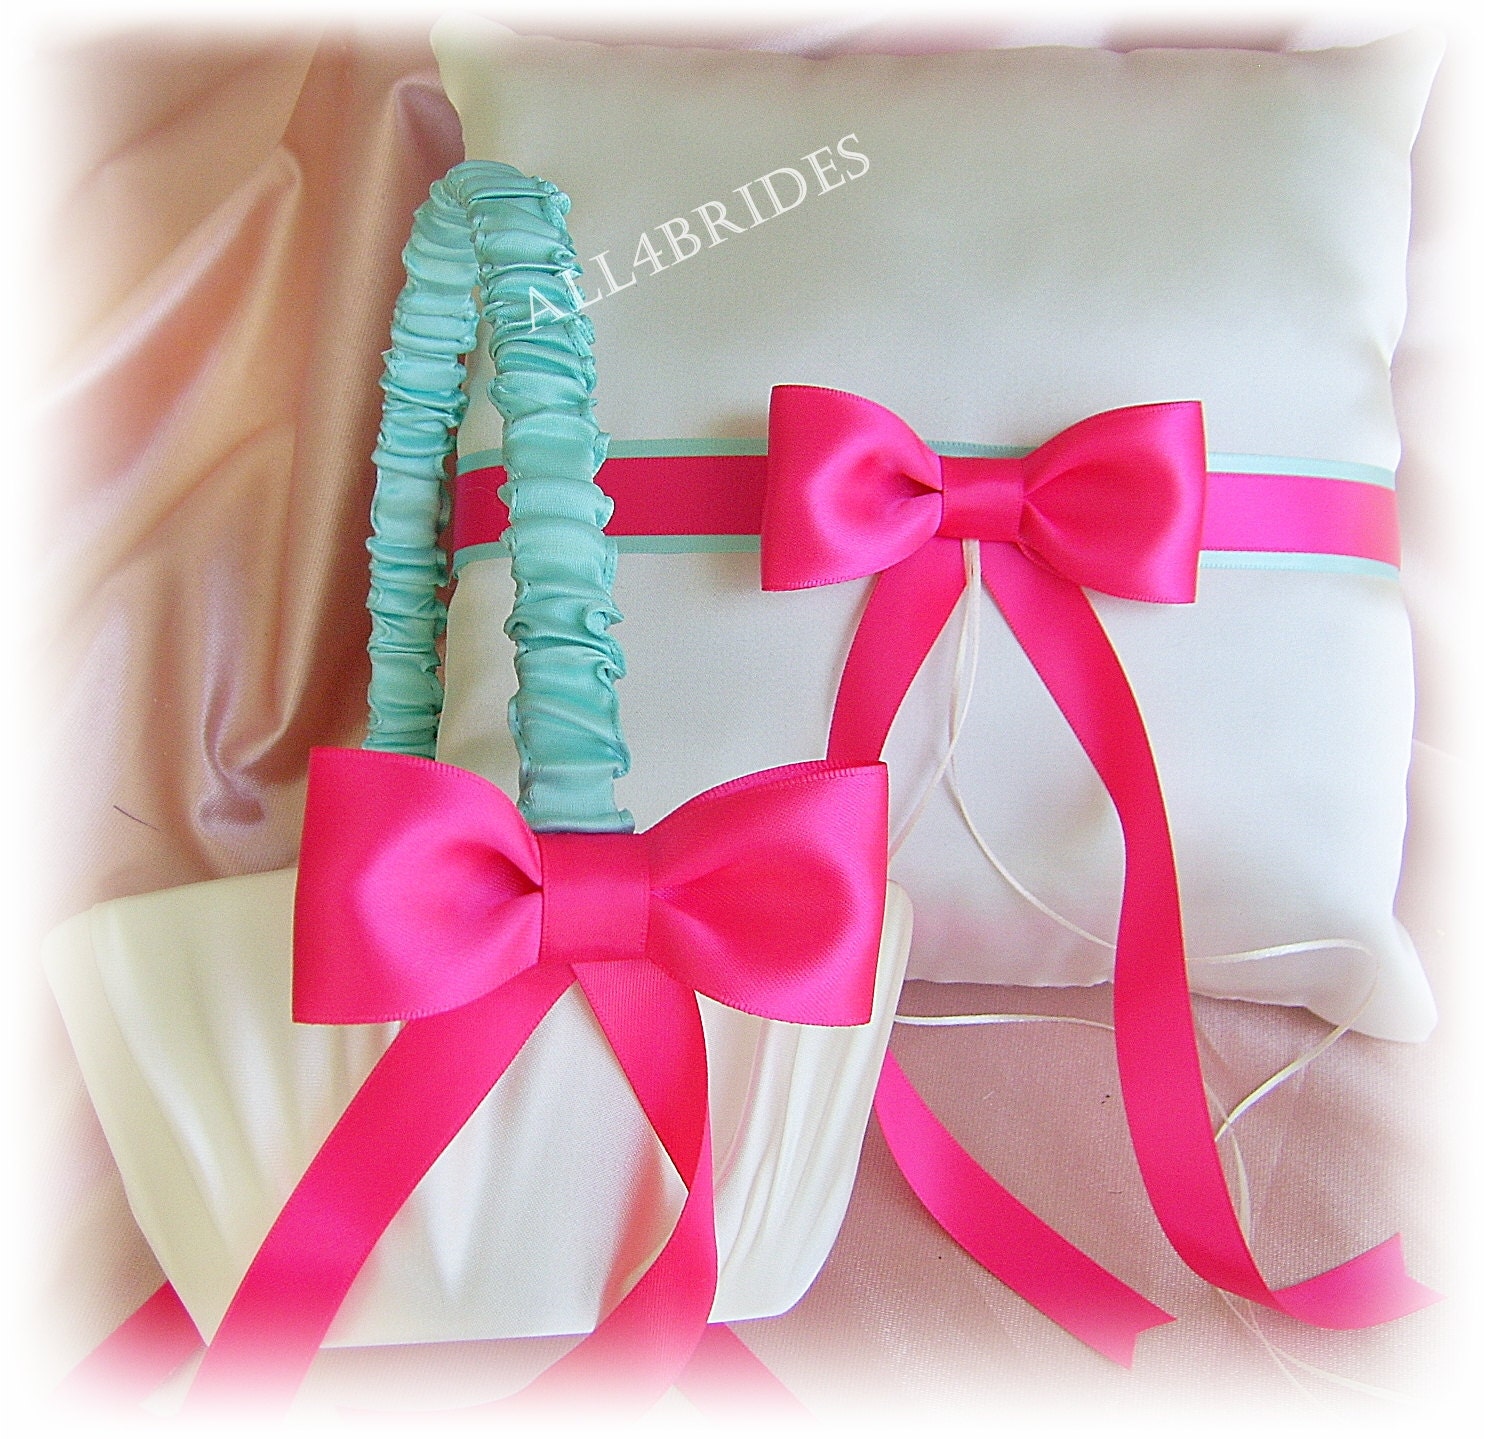 Weddings ring pillows and baskets, Hot Pink and Aqua ring bearer pillow and flower girl basket